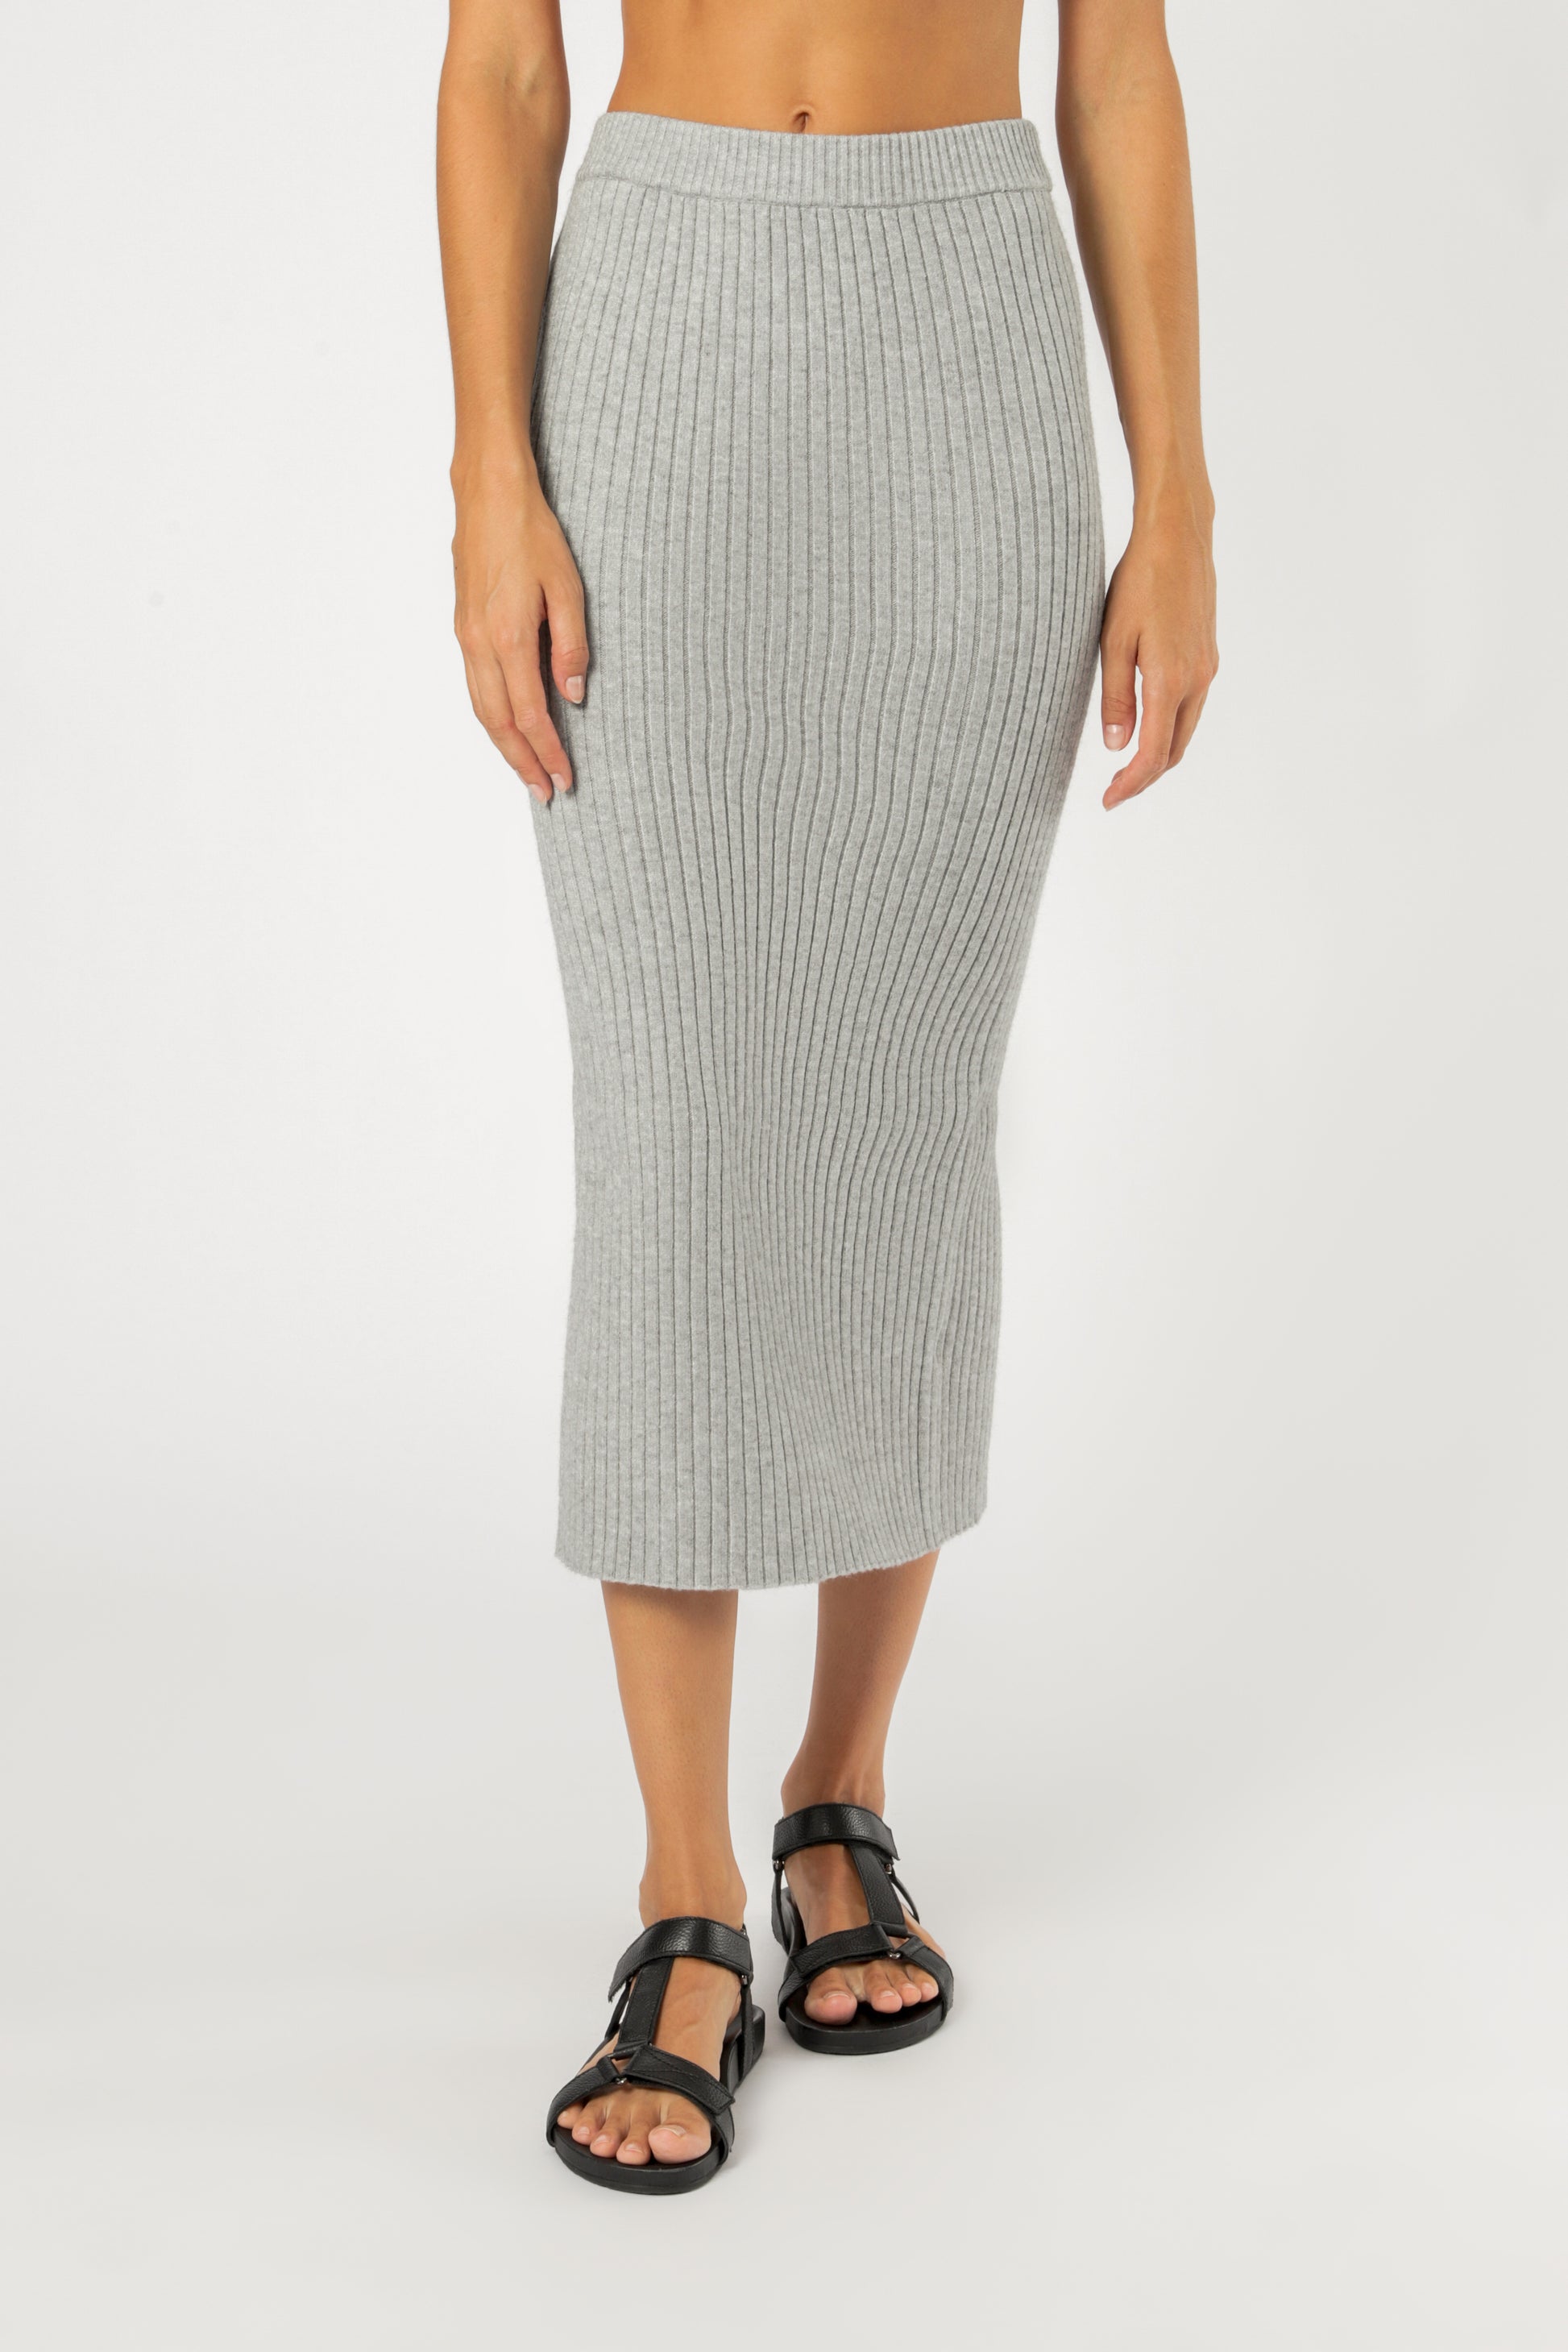 Nude Lucy dylan knit skirt grey marle knitwear